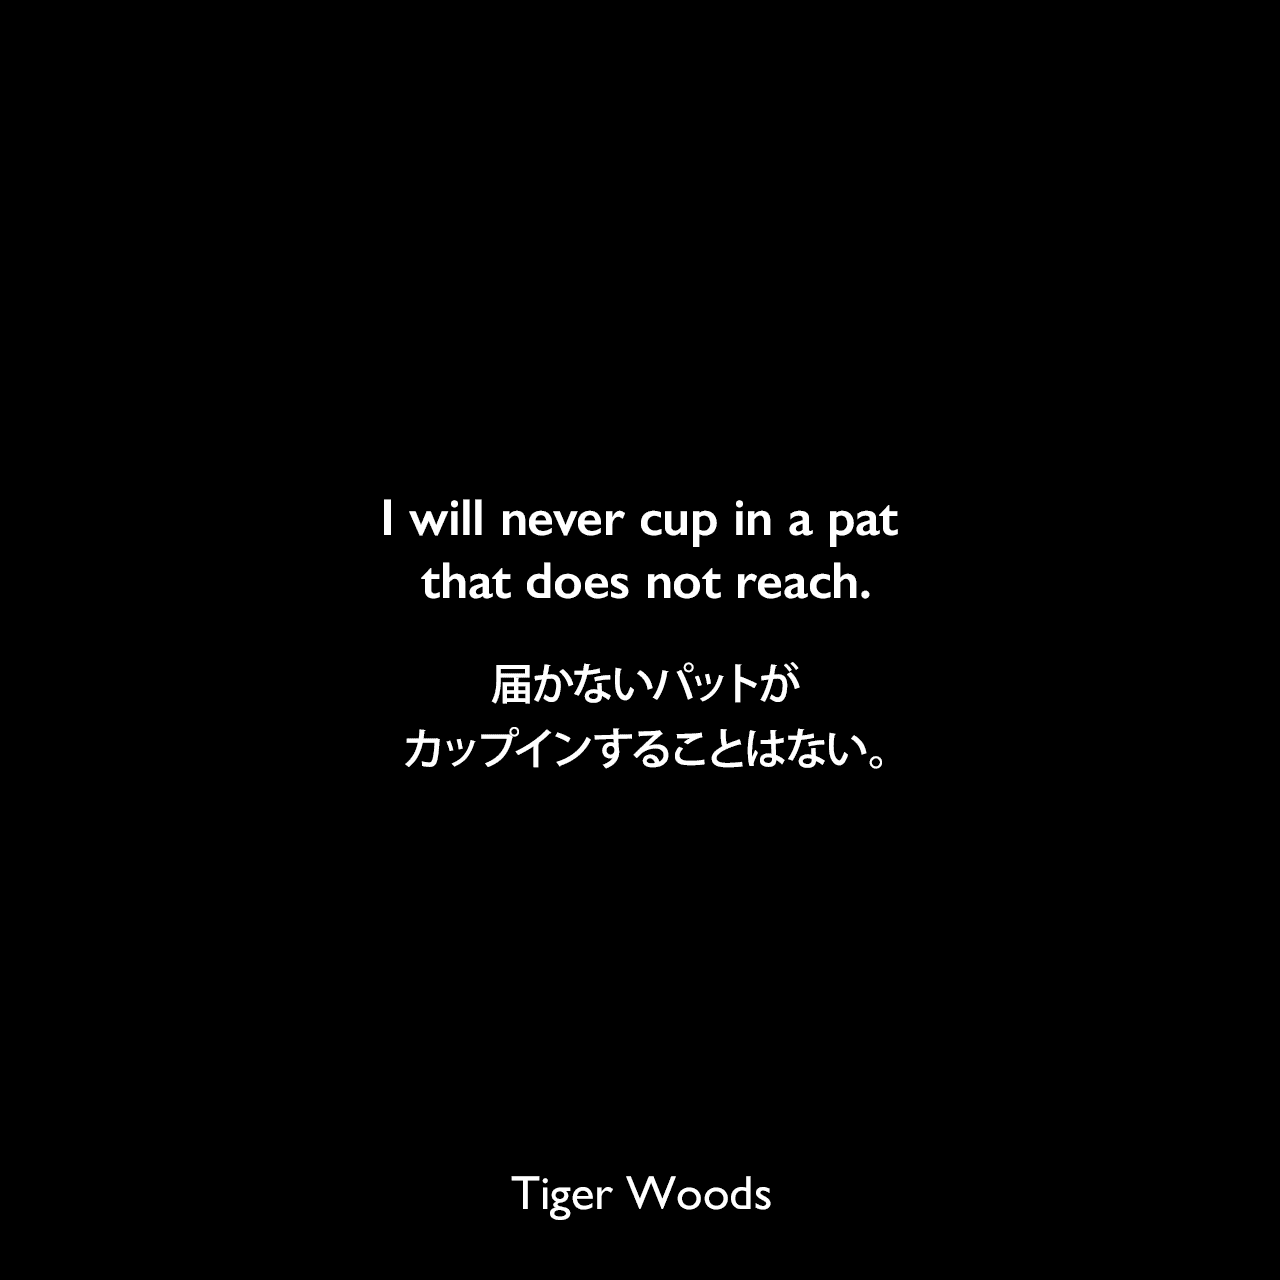 I will never cup in a pat that does not reach.届かないパットがカップインすることはない。Tiger Woods